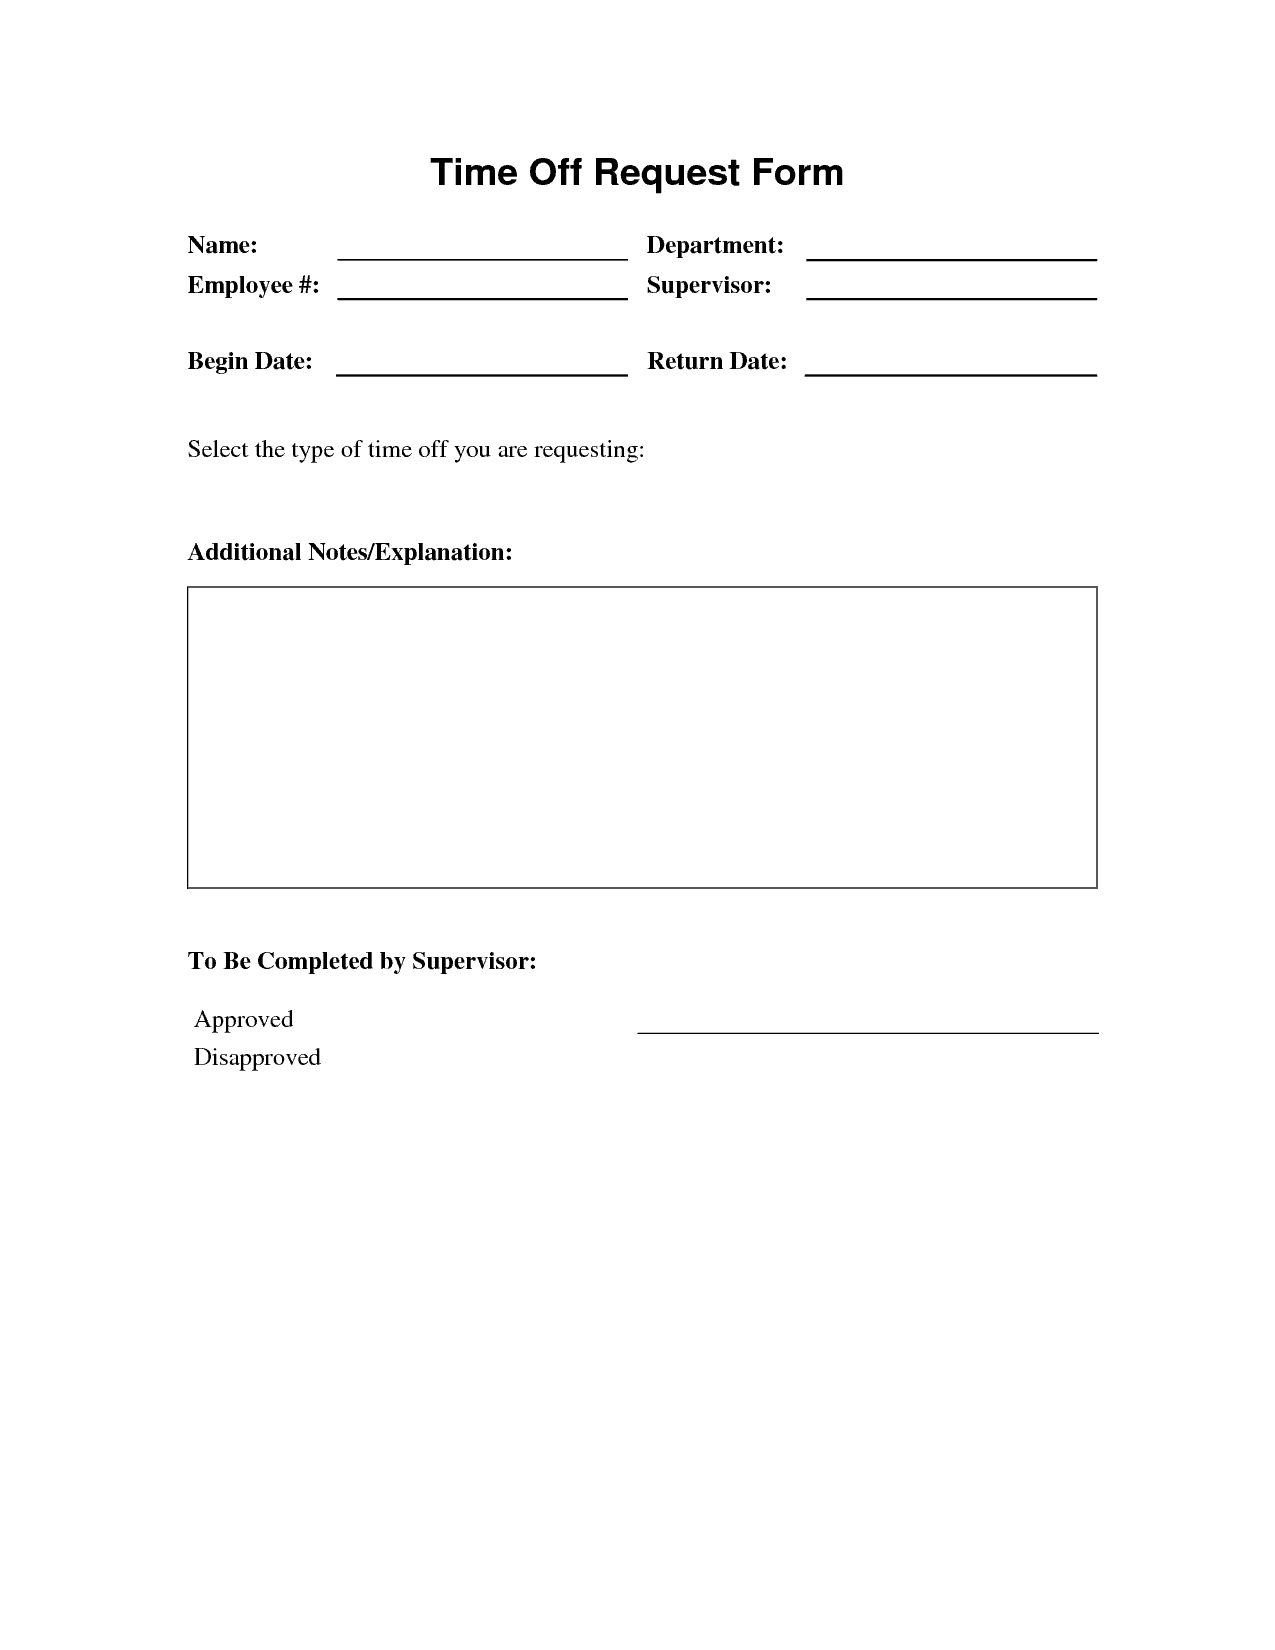 Time Off Request Forms - Word Excel Fomats